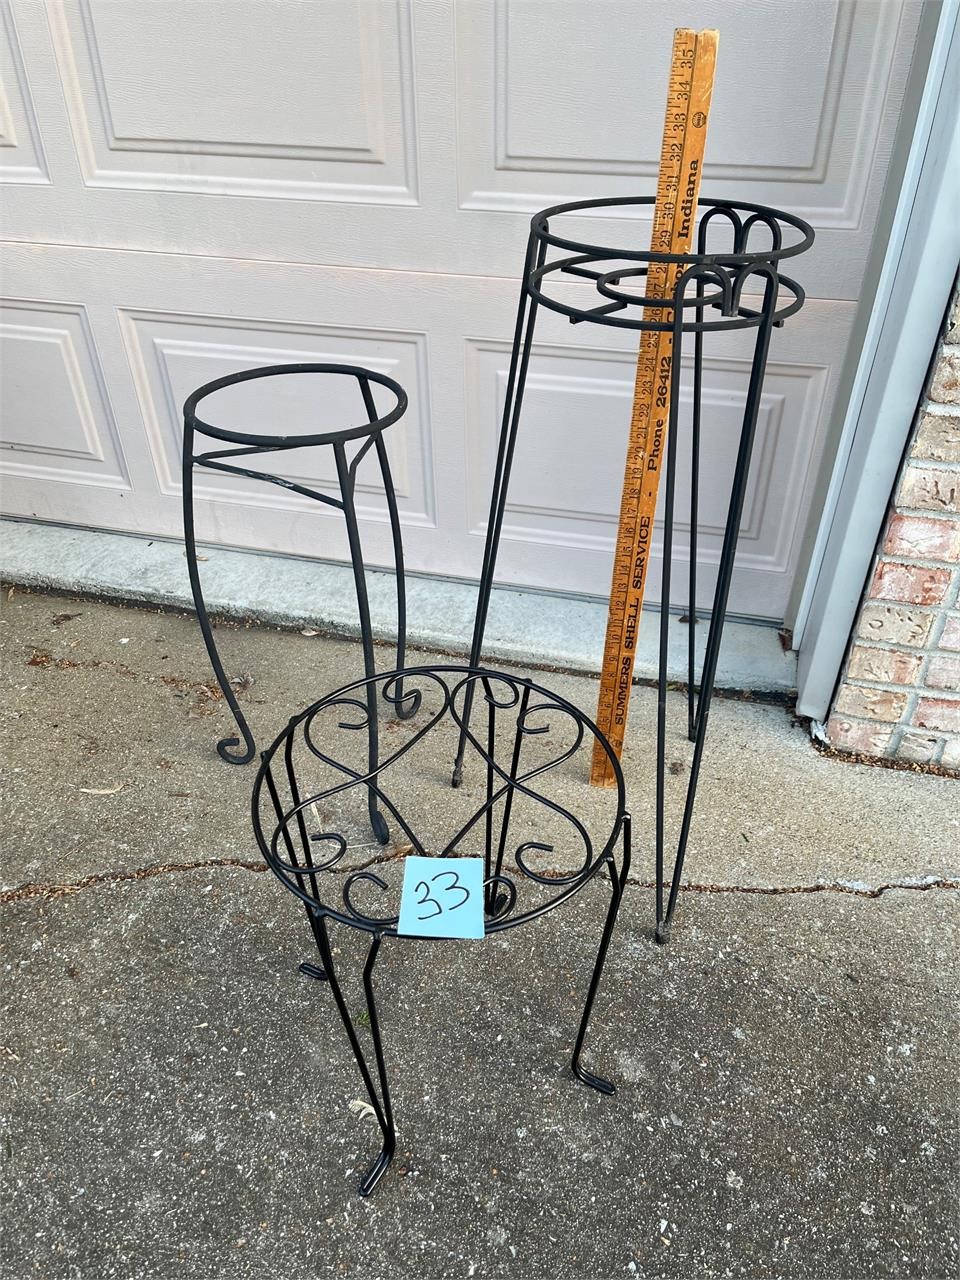 3 wrought iron plant stands